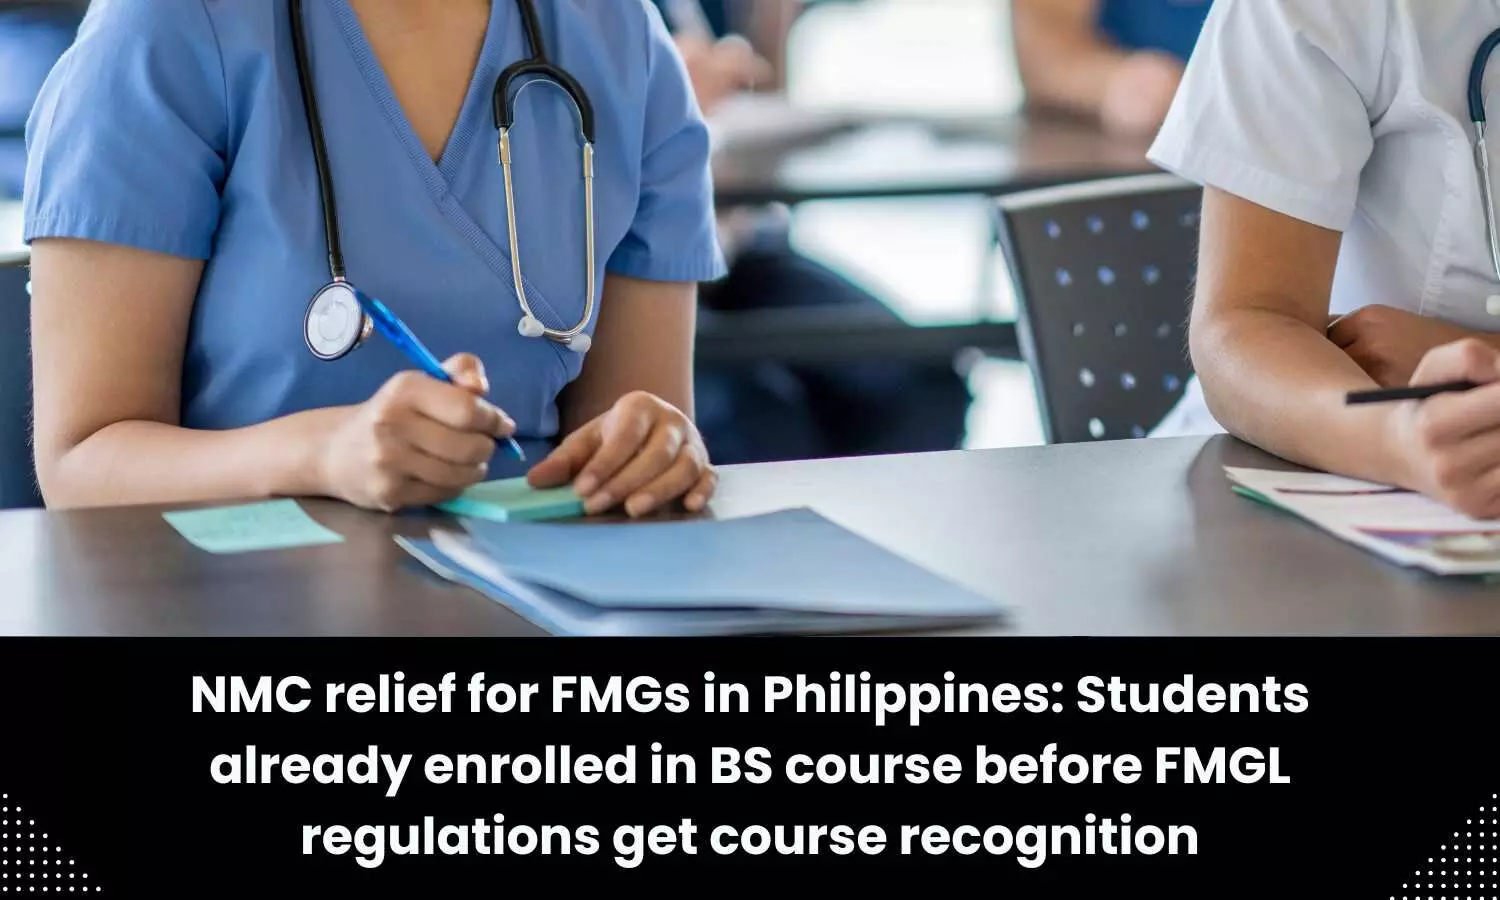 Relief to FMGs in Philippines, students already enrolled in BS course before FMGL regulations get course recognition: NMC